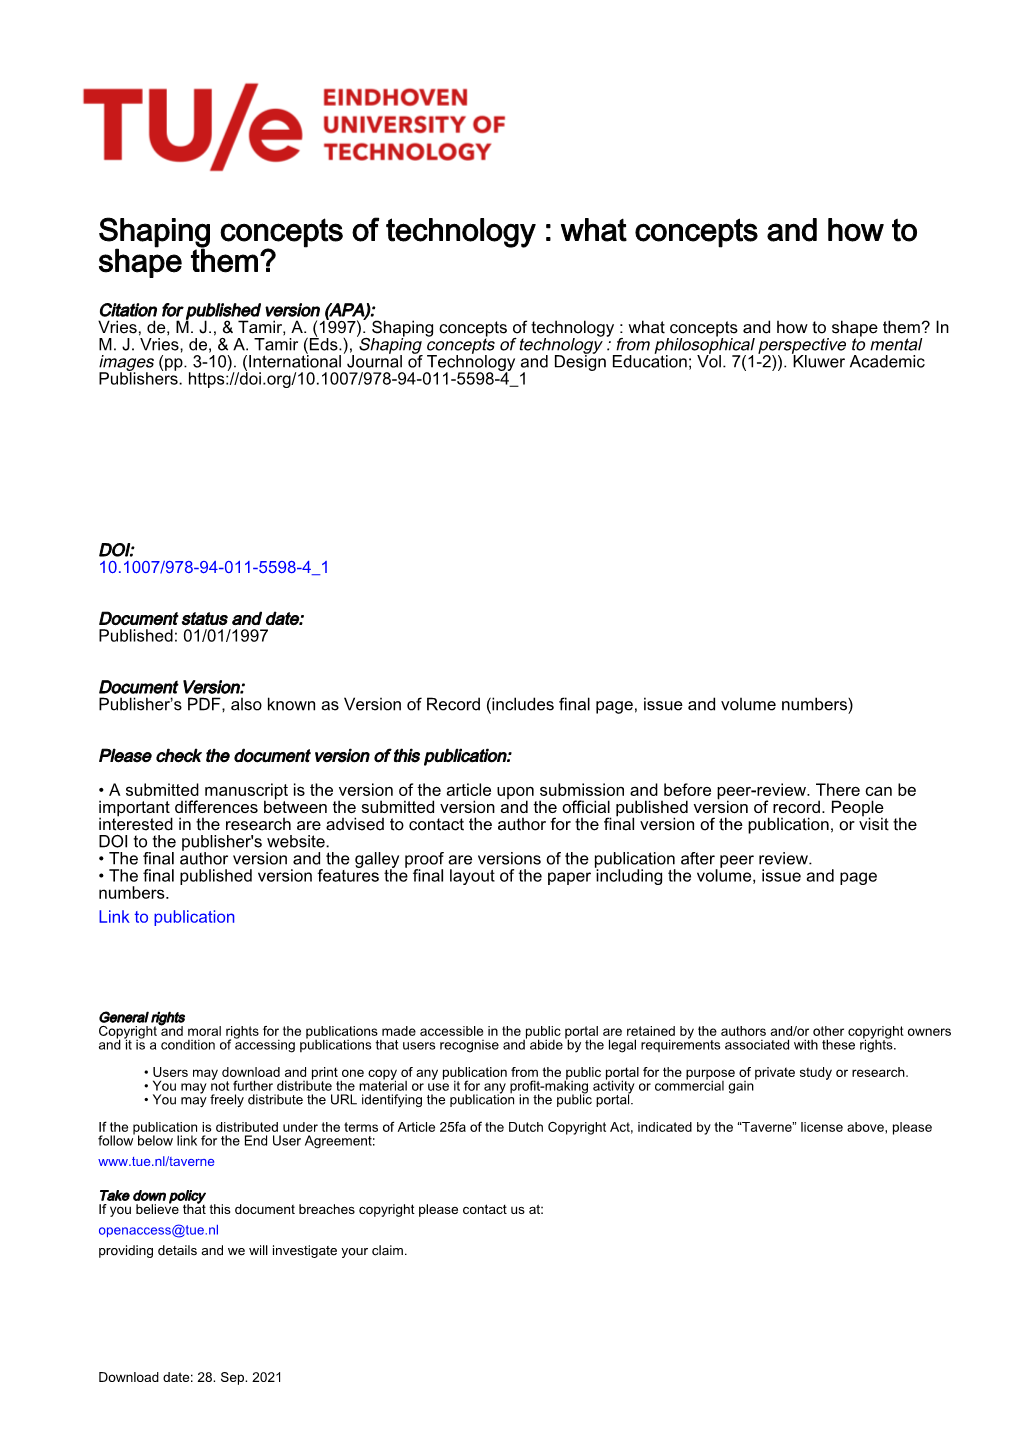 Shaping Concepts of Technology : What Concepts and How to Shape Them?